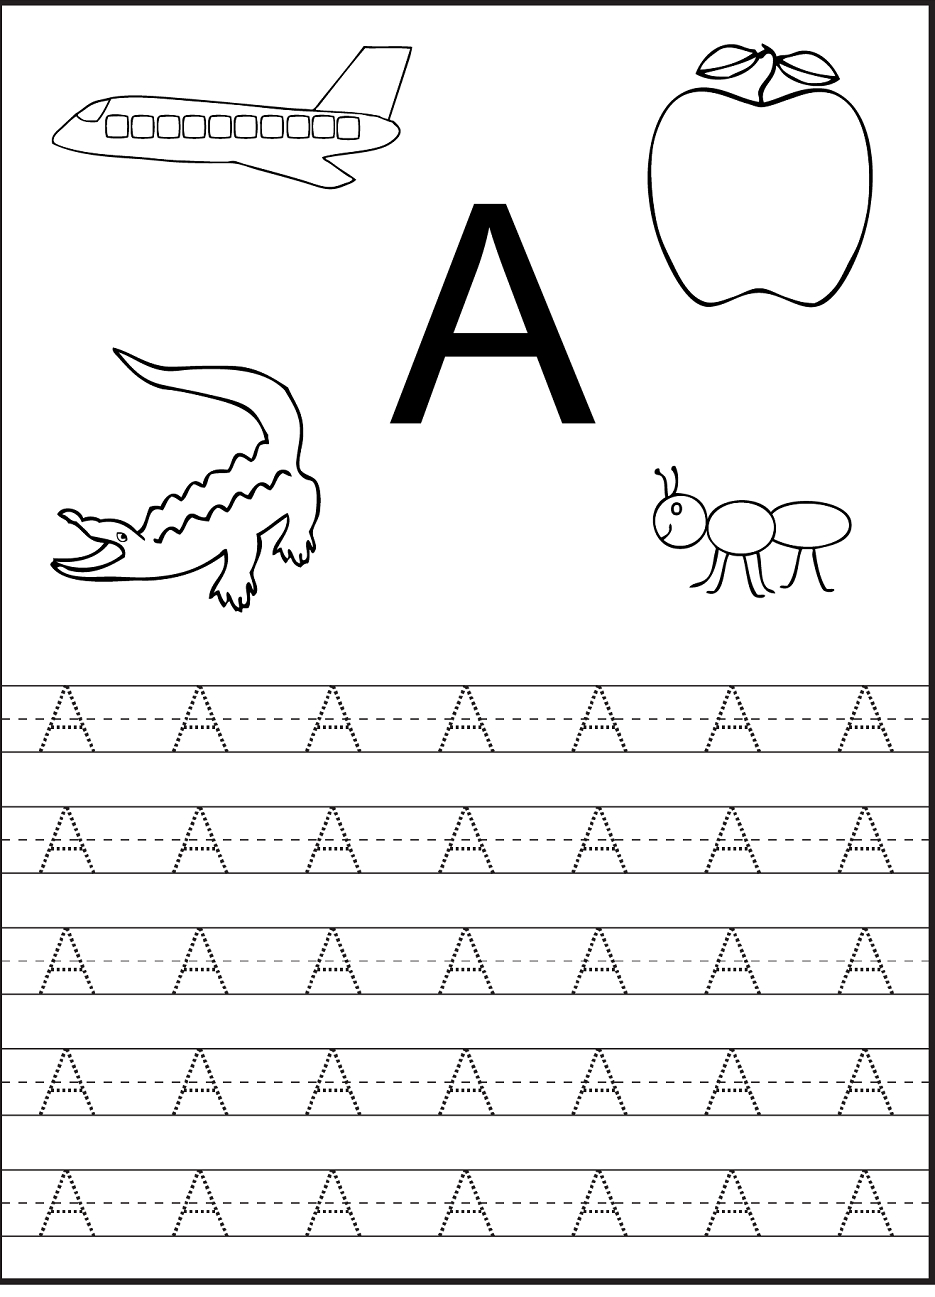 Tracing The Letter A Free Printable | Preschool Worksheets with Printable Preschool Worksheets Tracing Letters